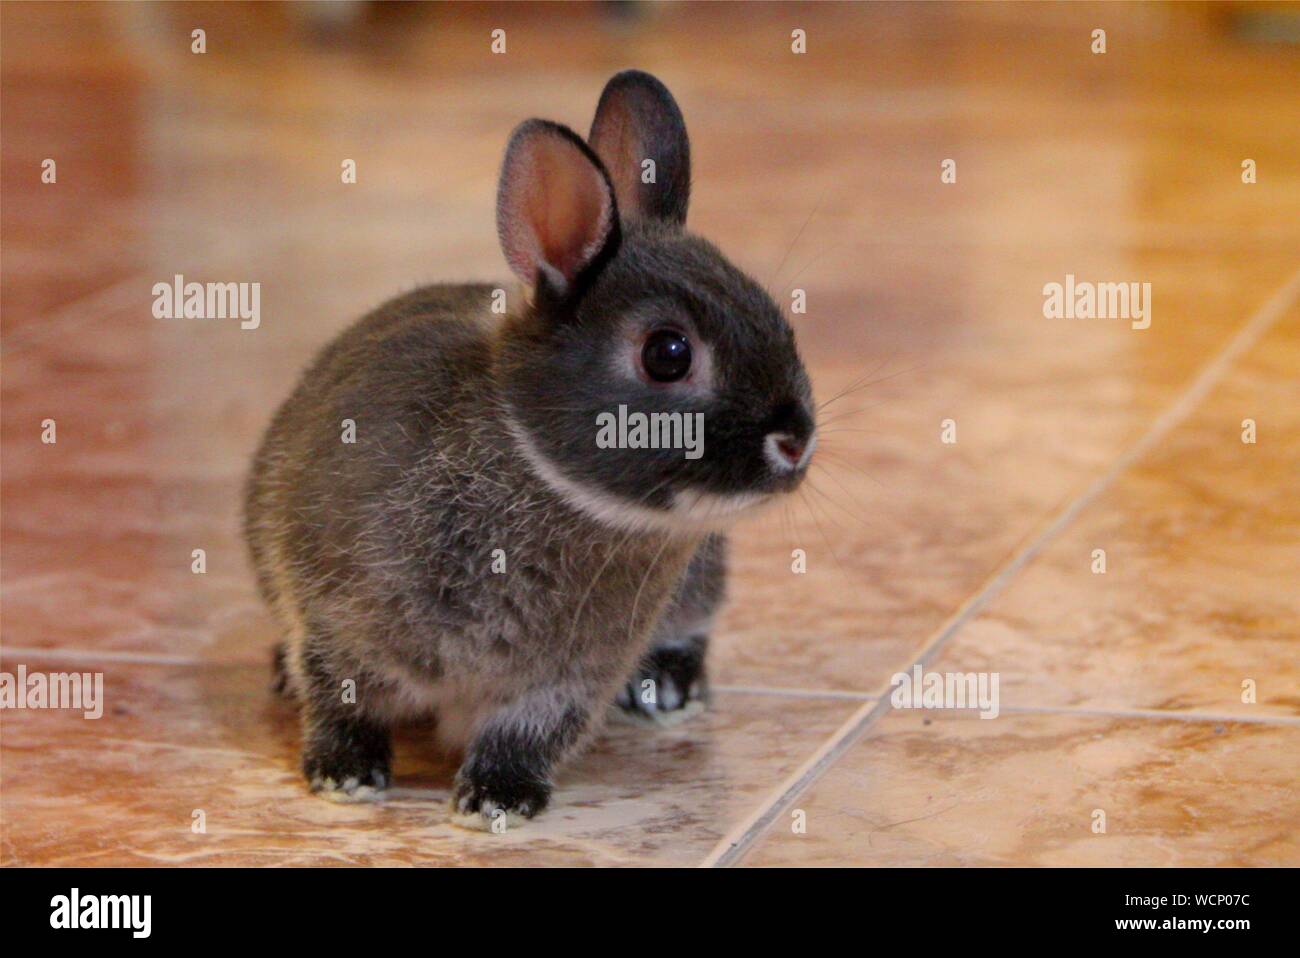 Close-up Of Bunny On Floor Stock Photo